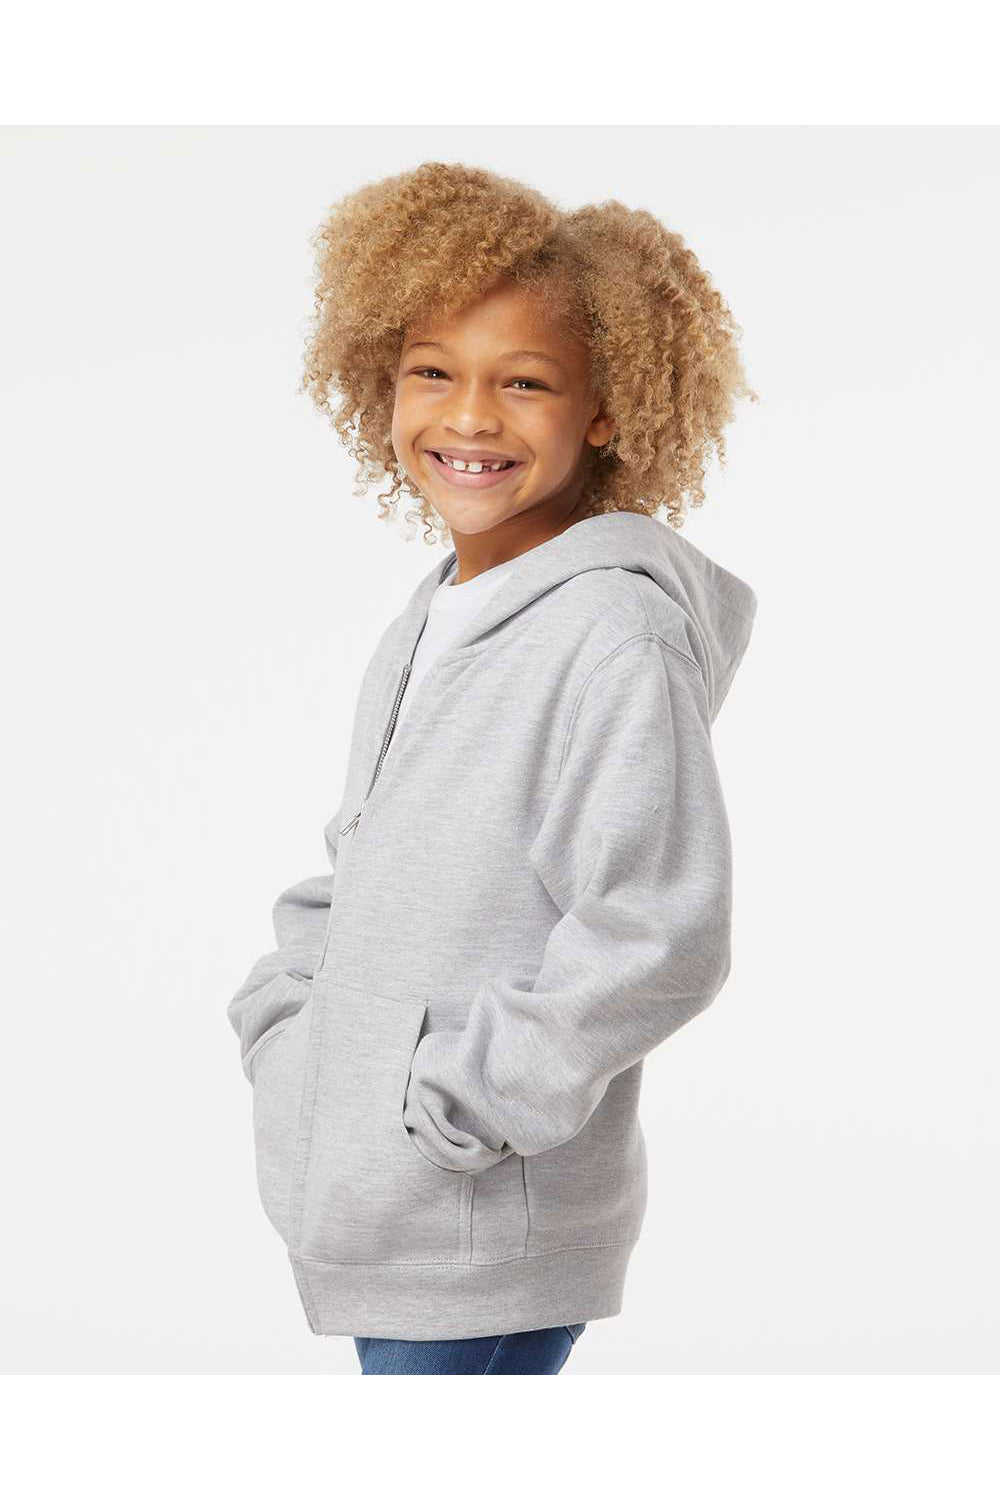 Independent Trading Co. SS4001YZ Youth Full Zip Hooded Sweatshirt Hoodie Heather Grey Model Side